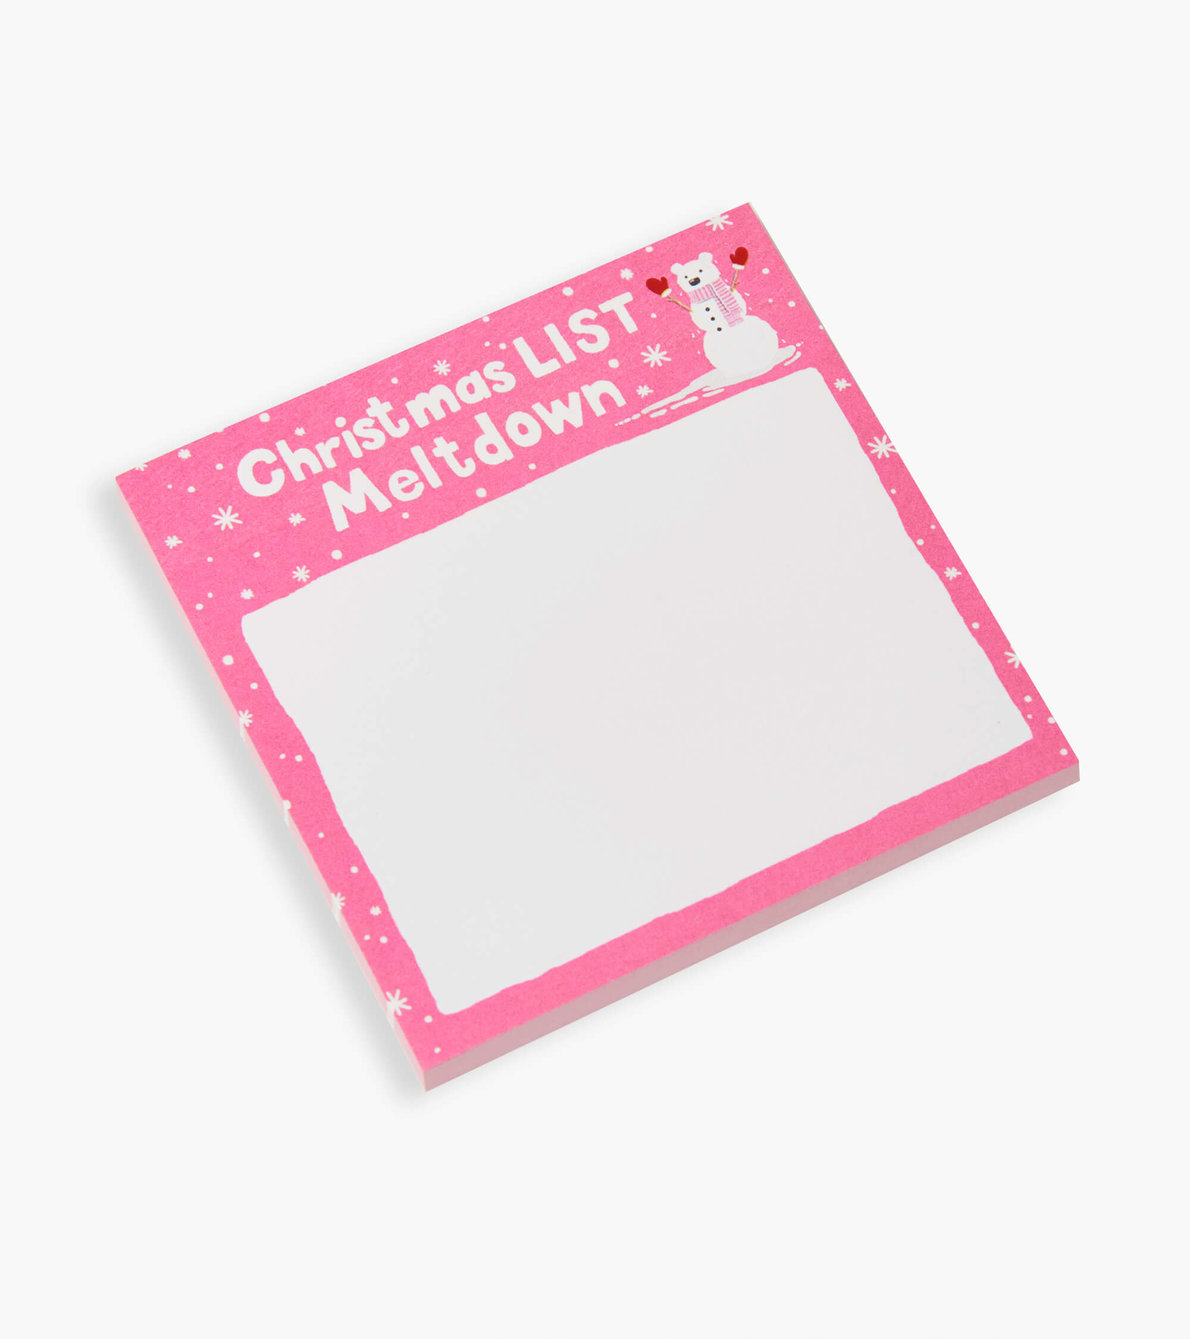 View larger image of Christmas List Meltdown Sticky Notes